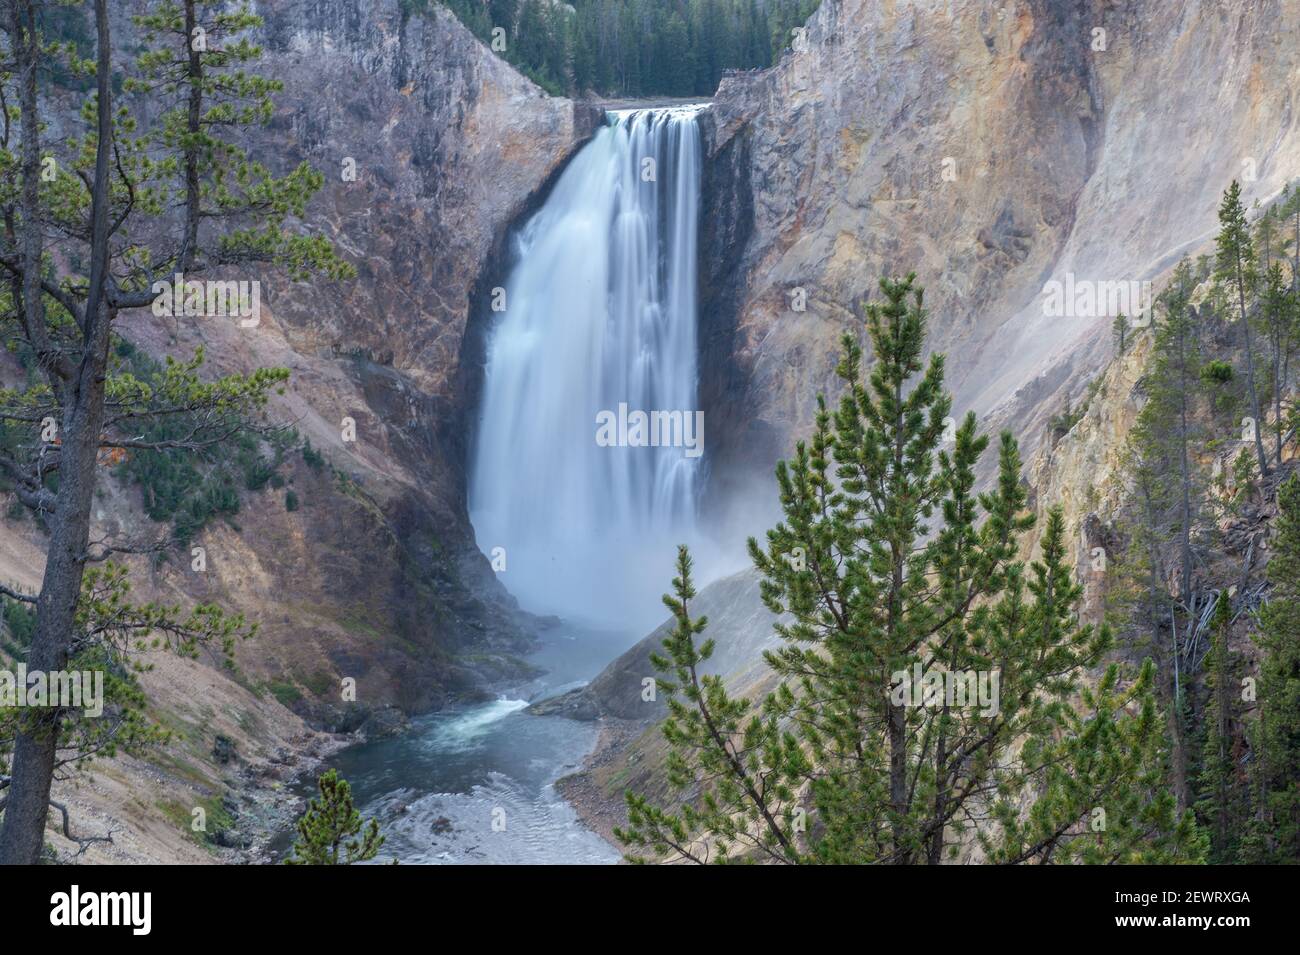 Lower Falls of the Grand Canyon framed in trees, Yellowstone National Park, UNESCO World Heritage Site, Wyoming, United States of America Stock Photo